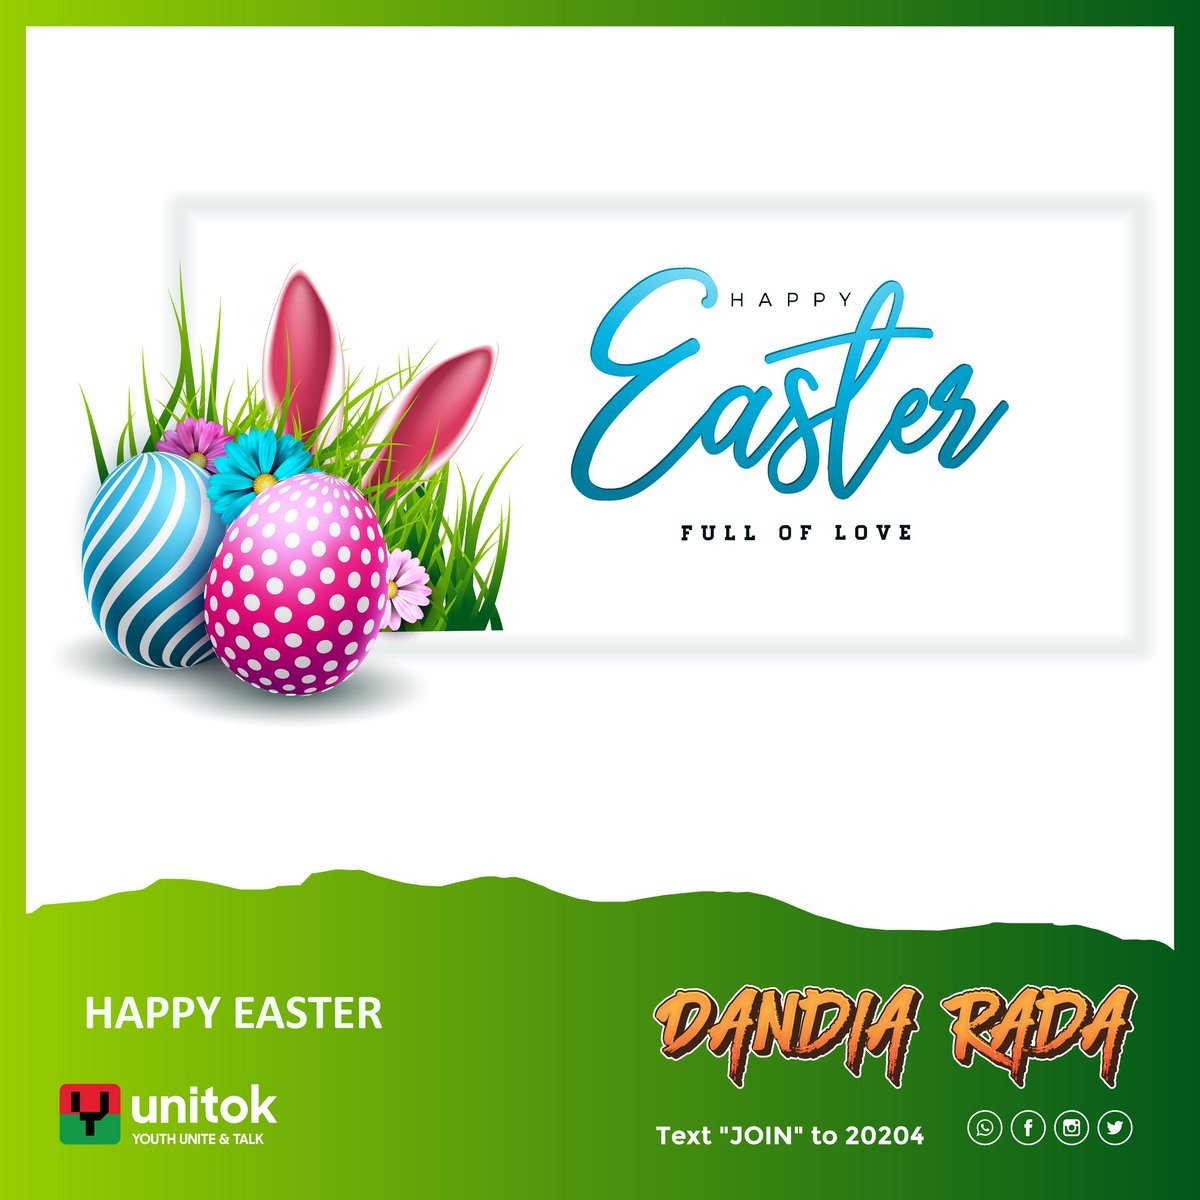 Happy Easter to you all. May you and your loved ones experience joy, hope and renewal during this season.